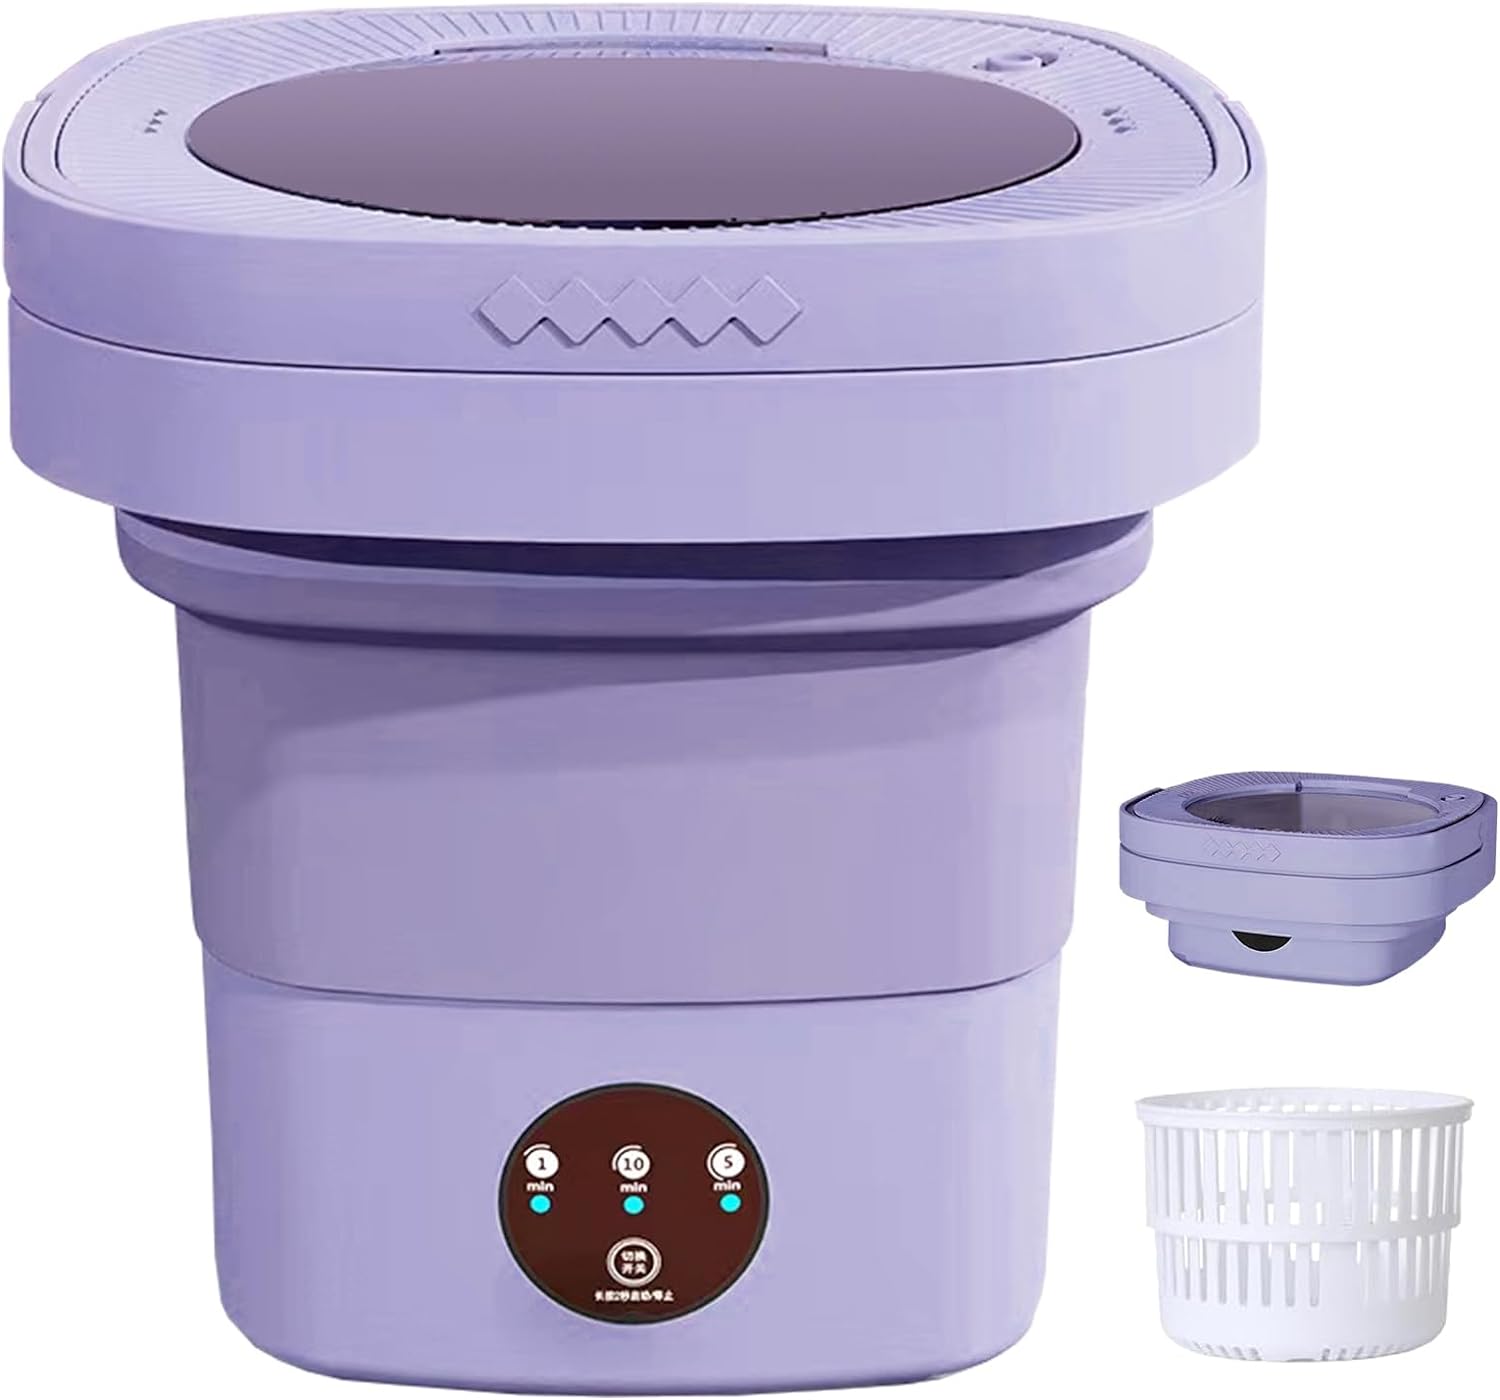 Portable Washing Machine and Dryer Combo, Mini Folding Washing Machine Portable with Disinfection Function, Small Portable Washer and Dryer Combo for Apartments, Dorm, Camping, RV, Travel 6.5L purple